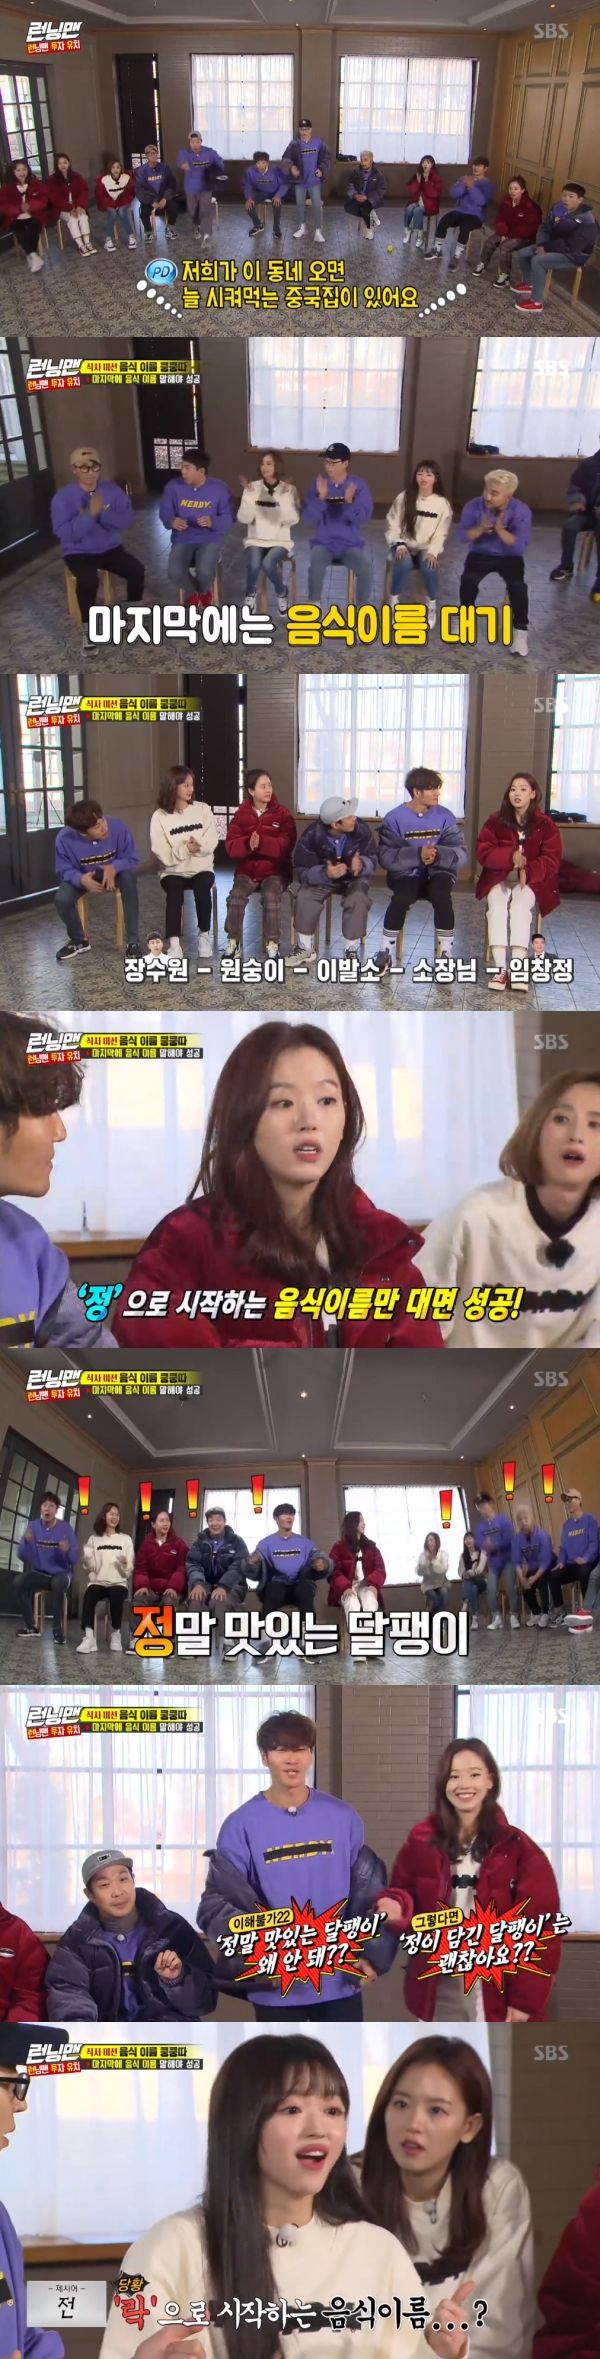 Kang Han-Na has revealed her affection for snails (?)On SBS Running Man broadcasted on the 8th, guest Kang Han-Na, YooAAAA Byung-jae, YooAAAAAAAAA, Lee Hee-Jin appeared and had a meal time after competing for food name kung ta.On the day of the show, the members played a game of food name kung-ta with Champon. YooAAAAAAAA Jae-Suk suggested, Lets split the two teams with a game.The members played a game of Avoiding the YooAAAA Jae-Suk team and Lee Hee-Jin and YooAAAAAAAAA joined the team because they could not avoid it.In the game that followed, the members misrepresentation followed: Kang Han-Na chose a really delicious snail as a food word starting with Jeong, and the members were smacked.YooAAAAAAAAA, who received the baton of YooAAAAAAAA Jae-Suk, did not succeed lunch box; Lee Kwang-soo directed YooAAAAAAAA Jae-Suk, saying, Its a lunch box and then he made a cold look.Im not wrong, laughed the man.In addition, YooAAAAAAAAA laughed as if he could not recall the word starting with Pak. Haha, who watched the suffering of YooAAAAAA, shivered, saying, Pak Chan-ho.Eventually, Kim Jong-kook team won and had a meal time.Kim Jong-kook, who ate chanpon with the members, asked the same team guest YooAAAA Byung-jae about what style do you like?YooAAAA Byung-jae explained, Its a cute style, I work hard, and in the meantime, there are many loopholes...The members recommended Jeon So-min according to the ideal type of YooAAAA Byung-jae.YooAAAAAAAA Byung-jae said, I do not know that it is cute, and Jeon So-min also nailed I am good with a beardless person.The two men turned their backs on each other and laughed at the members.